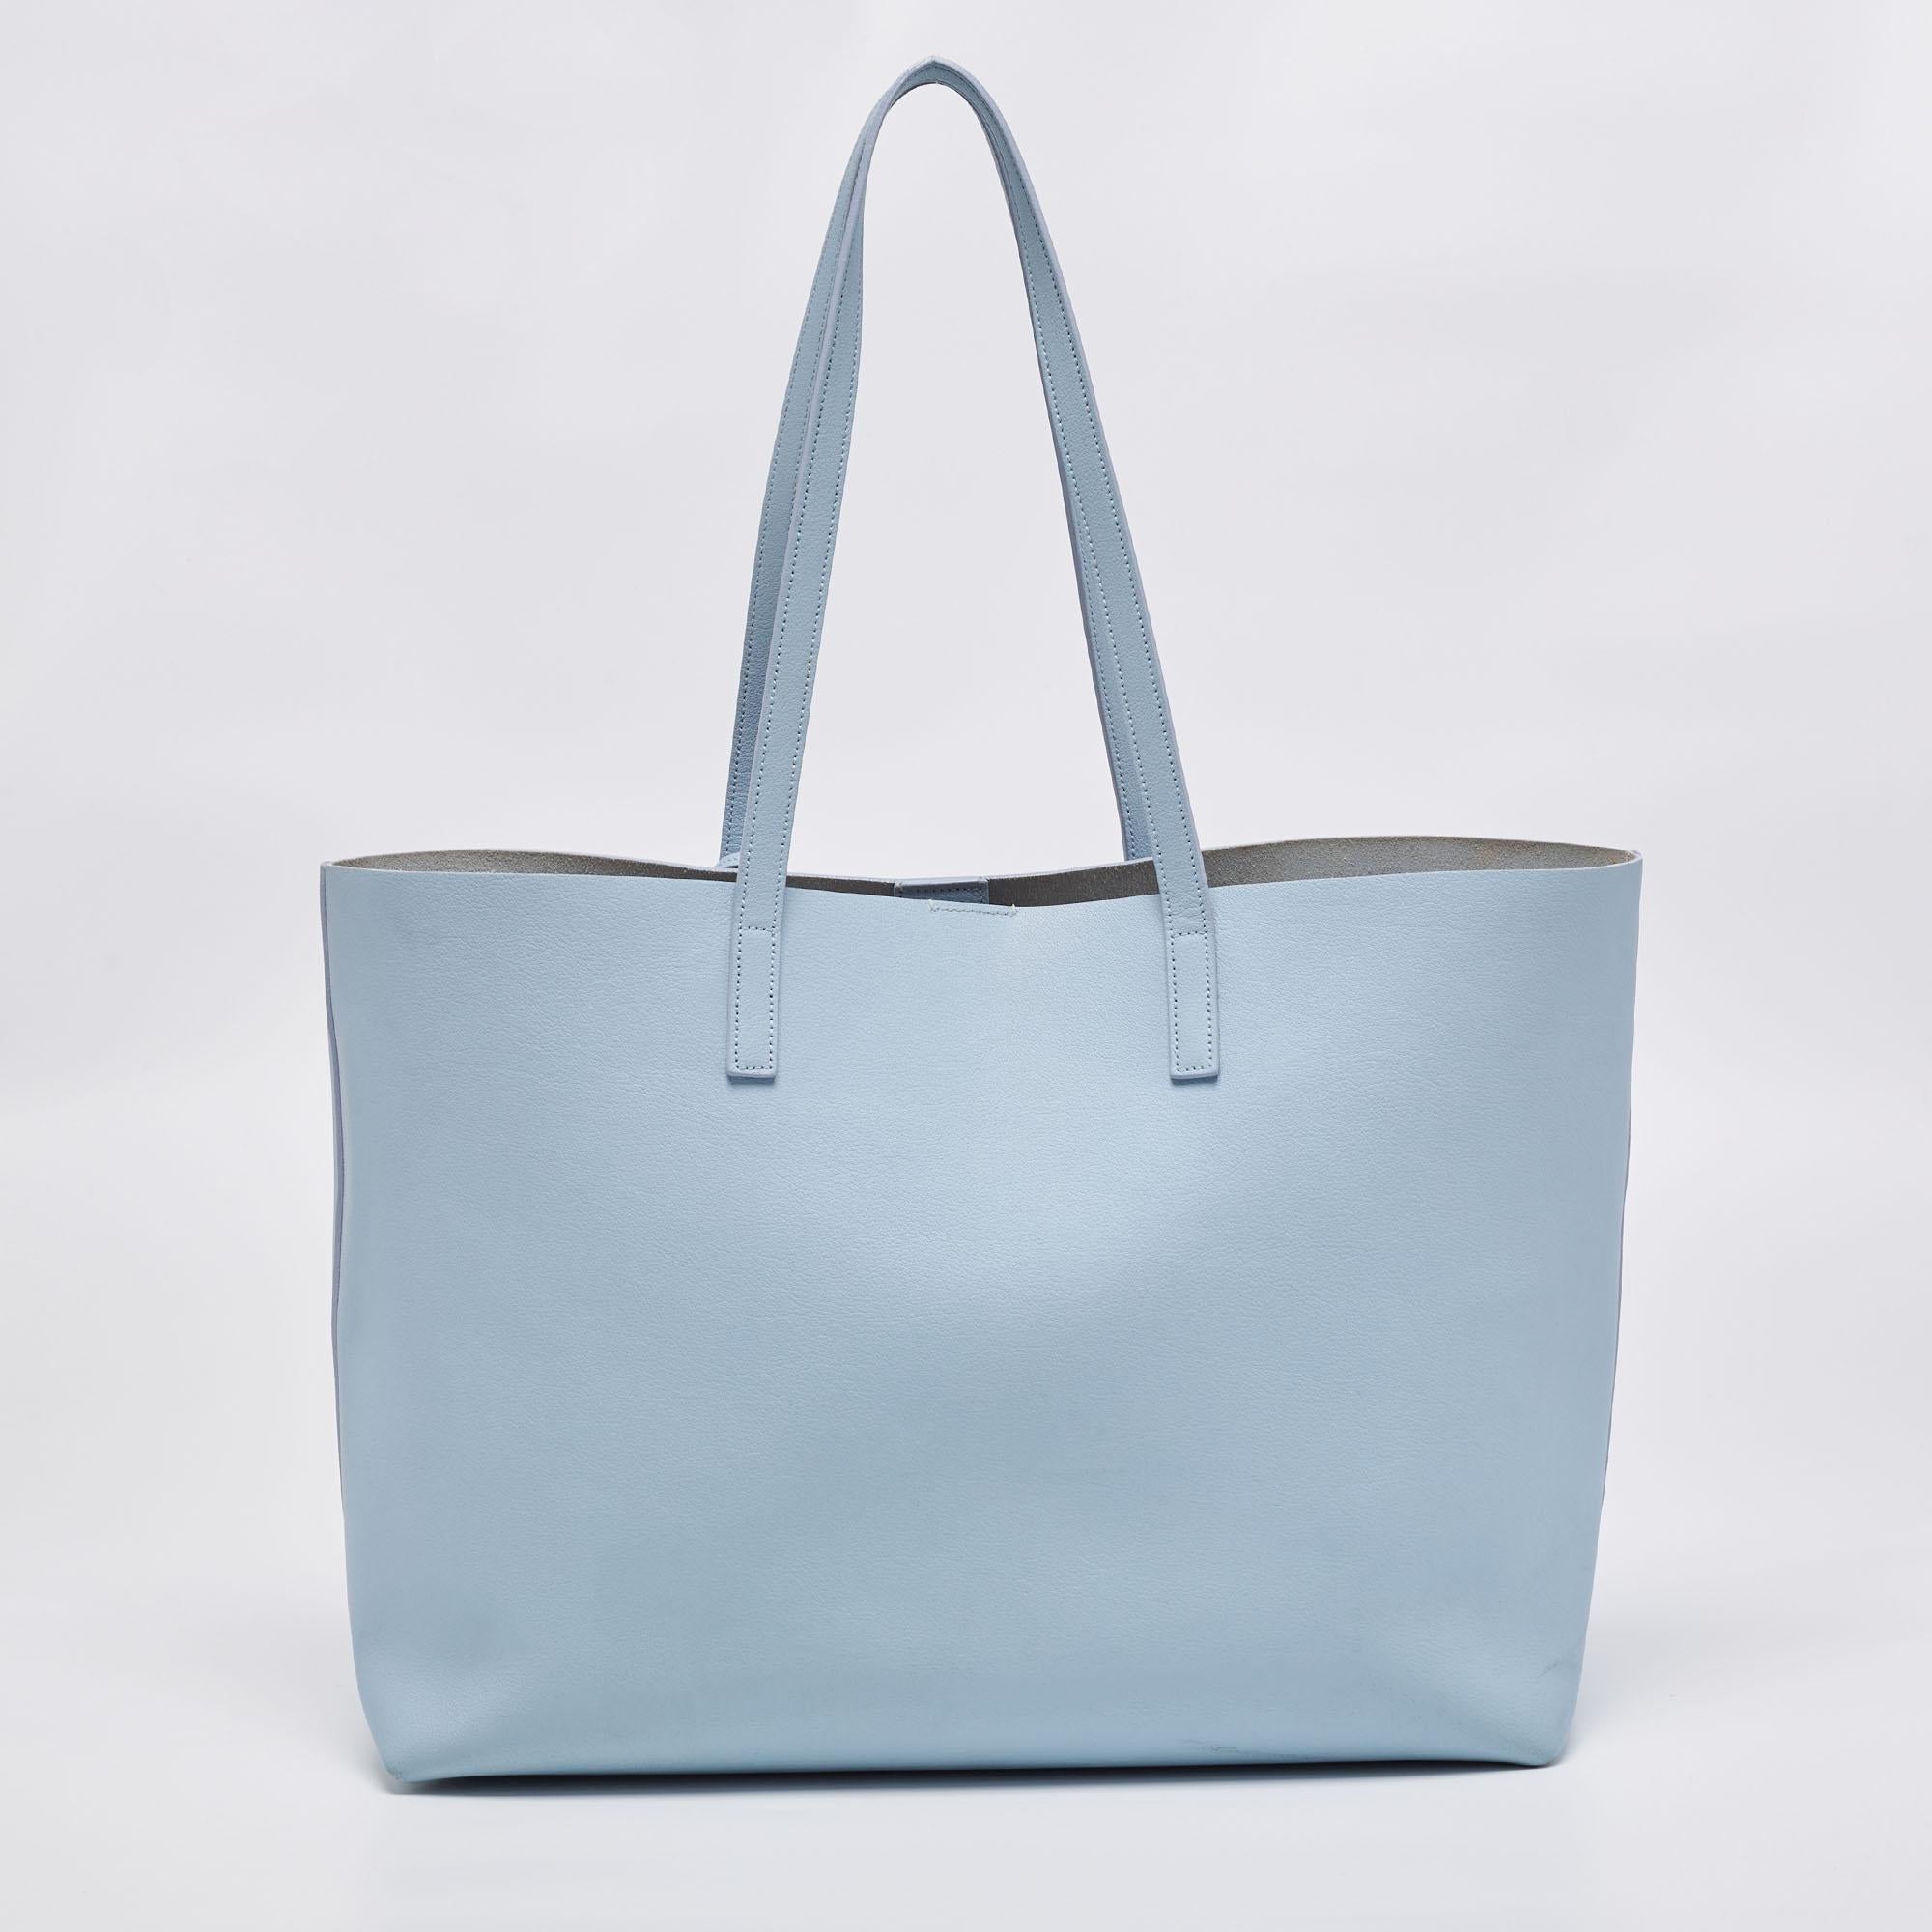 This Saint Laurent tote is all you need while running errands. Created from blue leather, it features a brand signature on the front, dual handles at the top, and gold-tone hardware. The suede-lined interior of the bag is spacious enough to make it